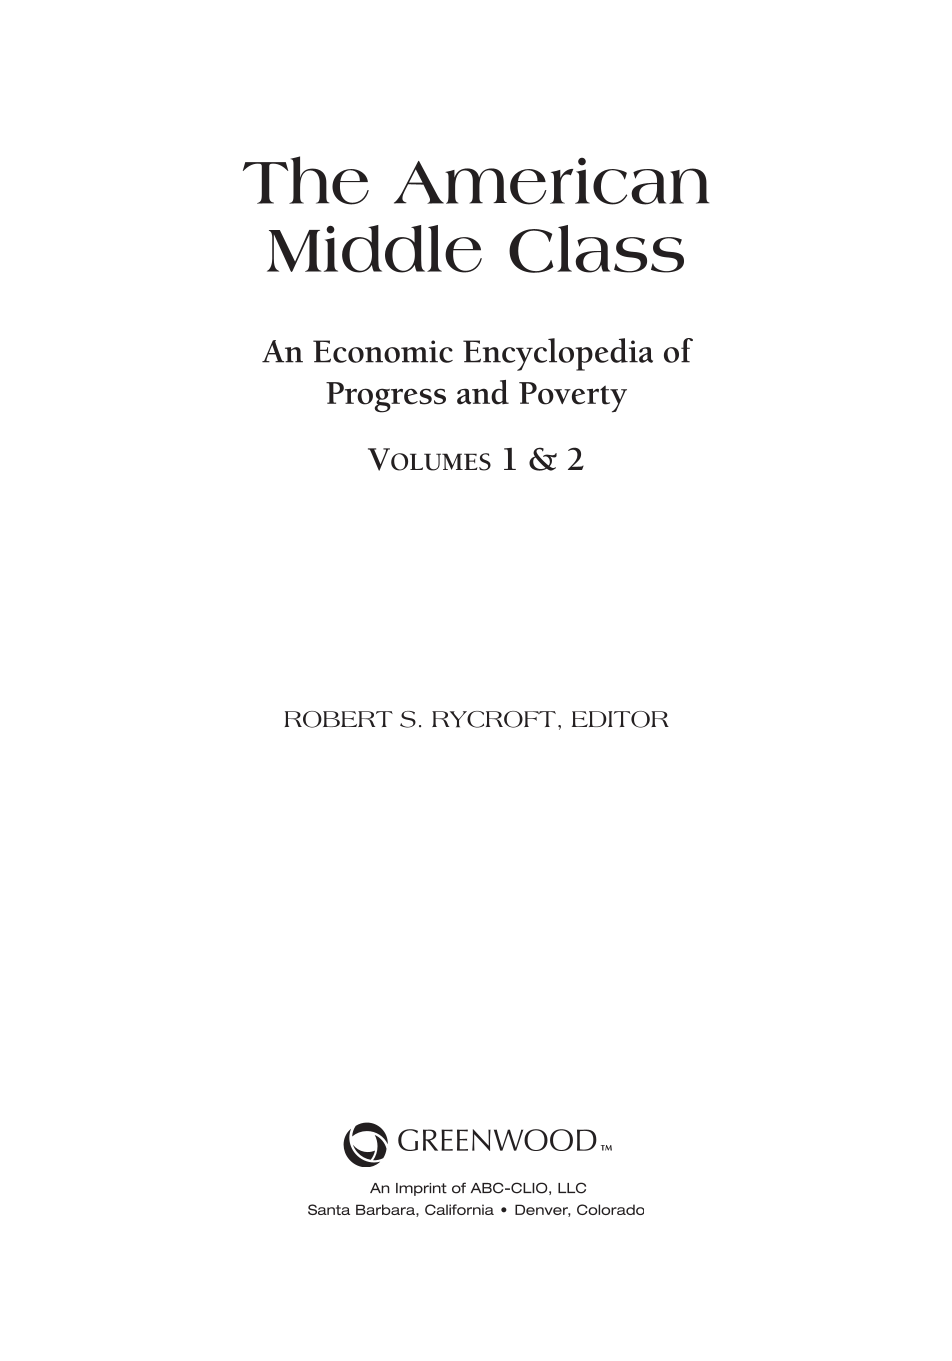 The American Middle Class: An Economic Encyclopedia of Progress and Poverty [2 volumes] page iii